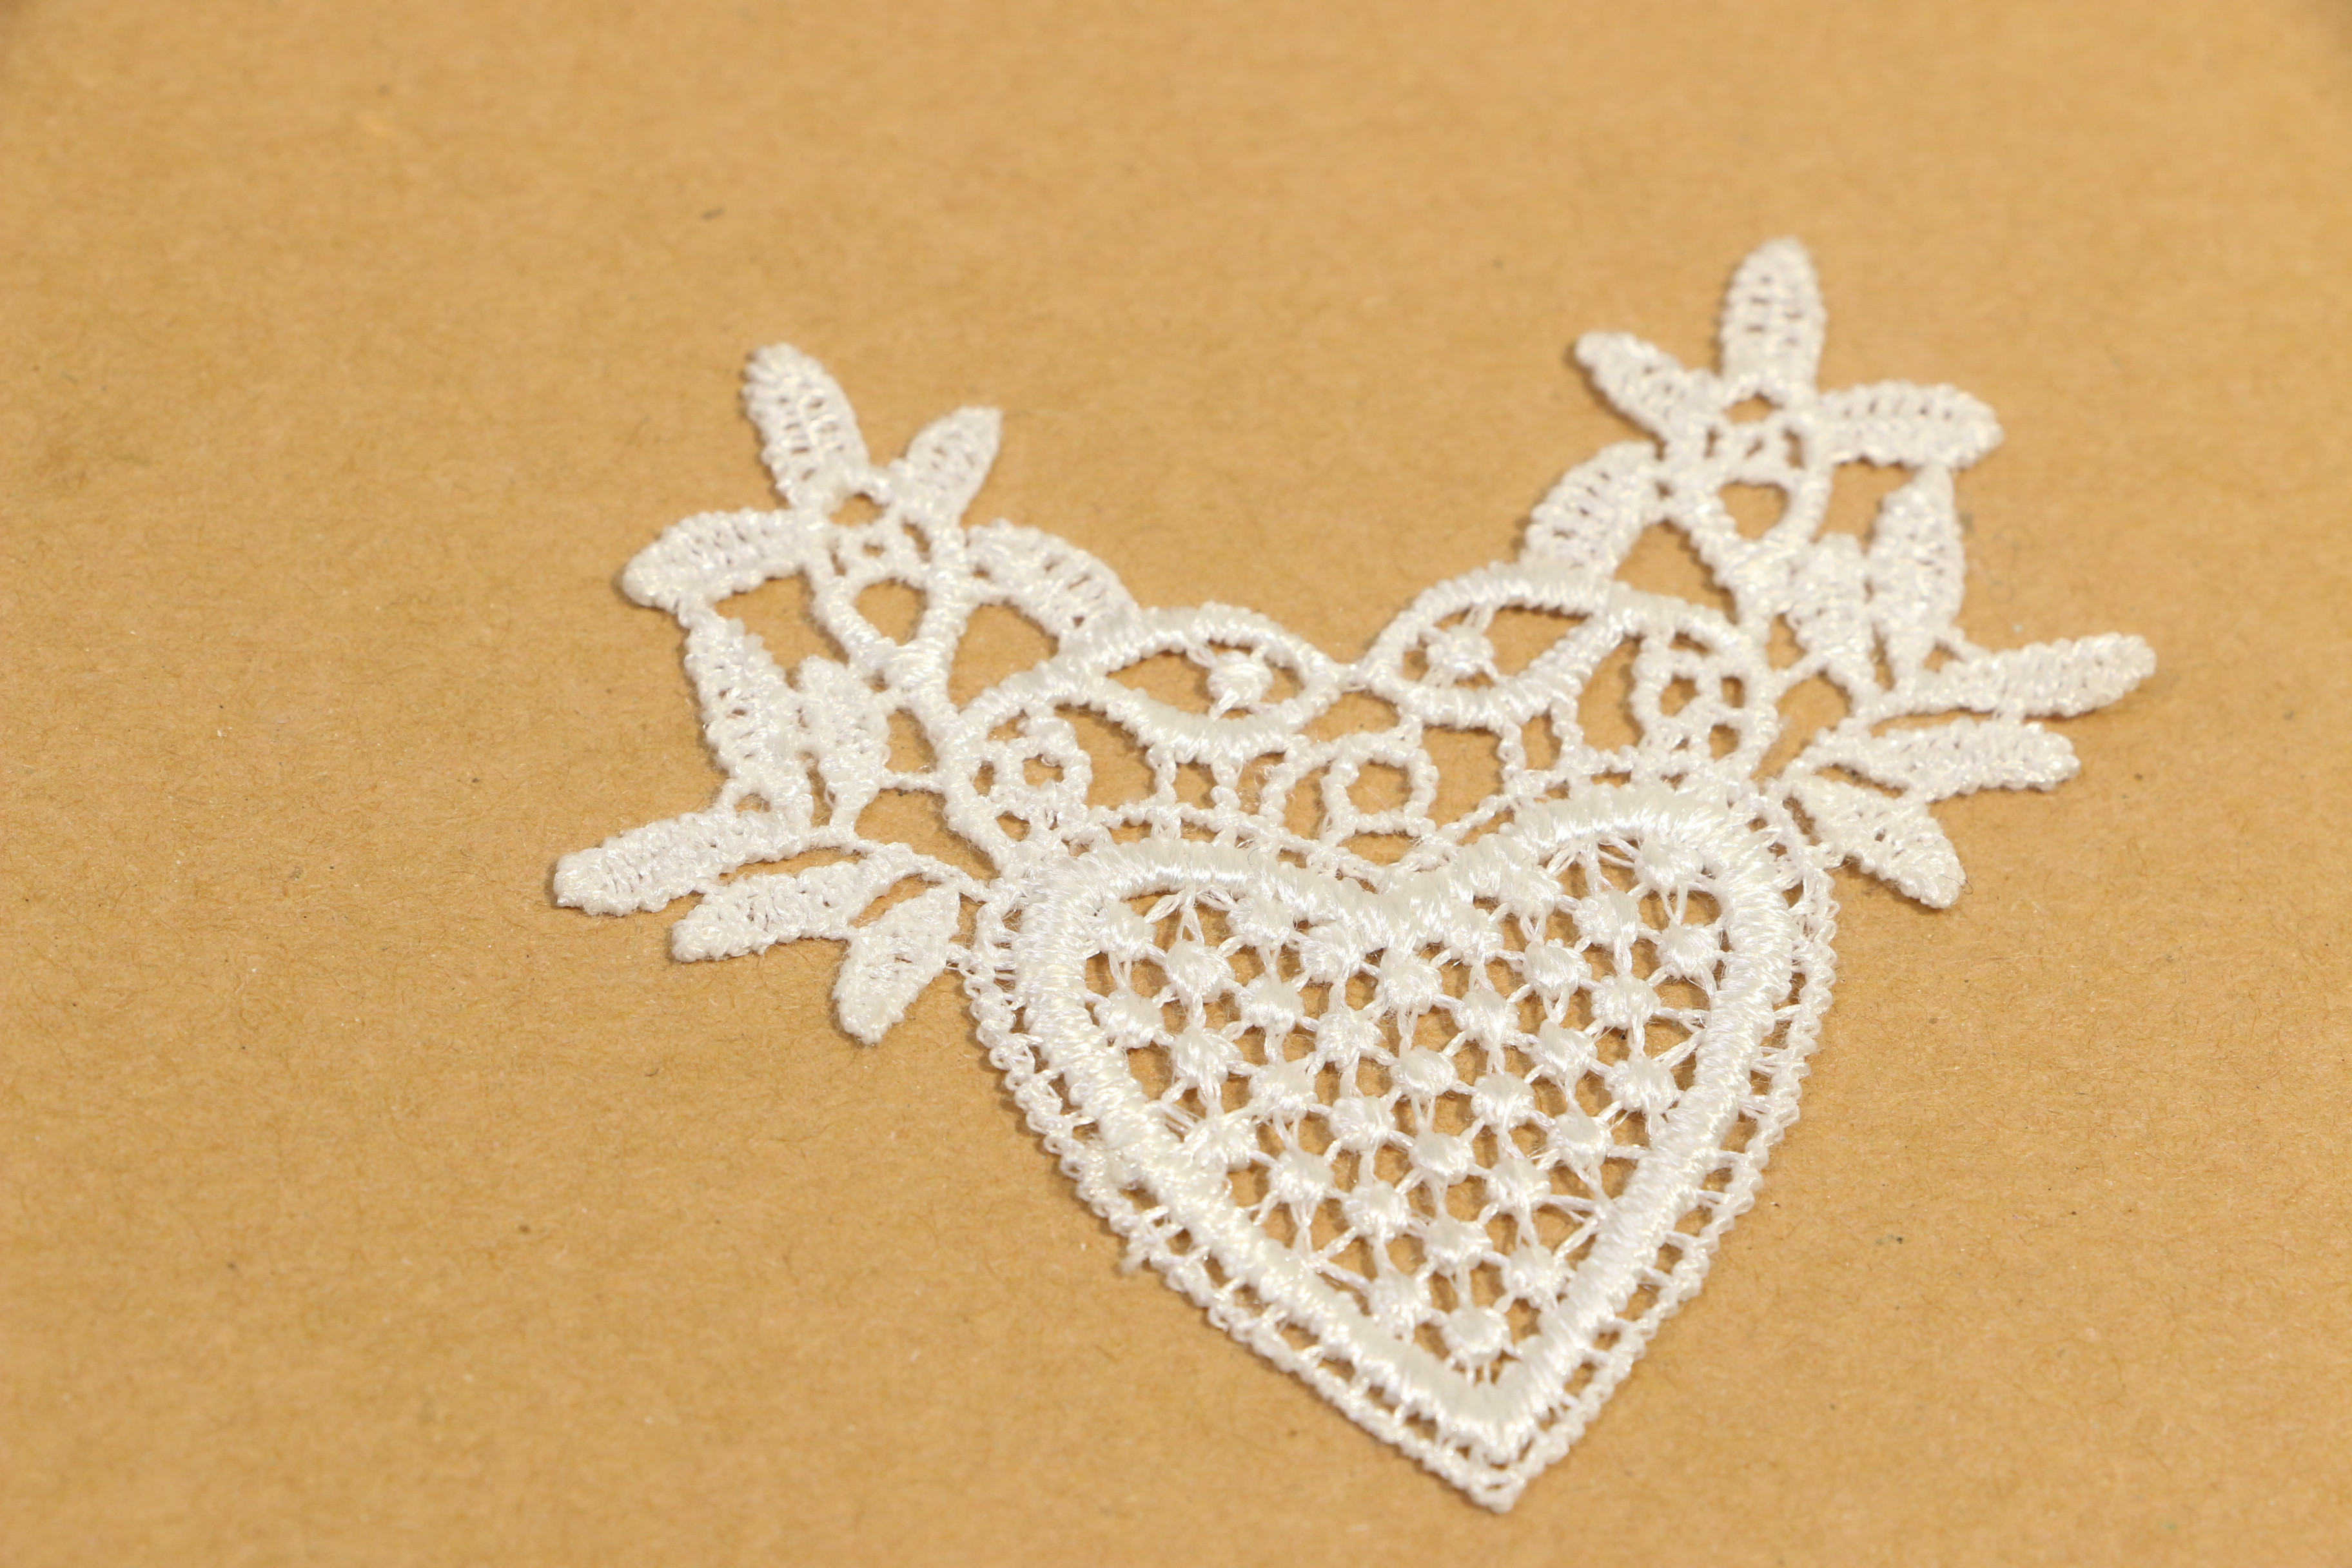  Embroidery Guipure Lace Applique 70mmx70mm Size Heart Shaped Manufactures